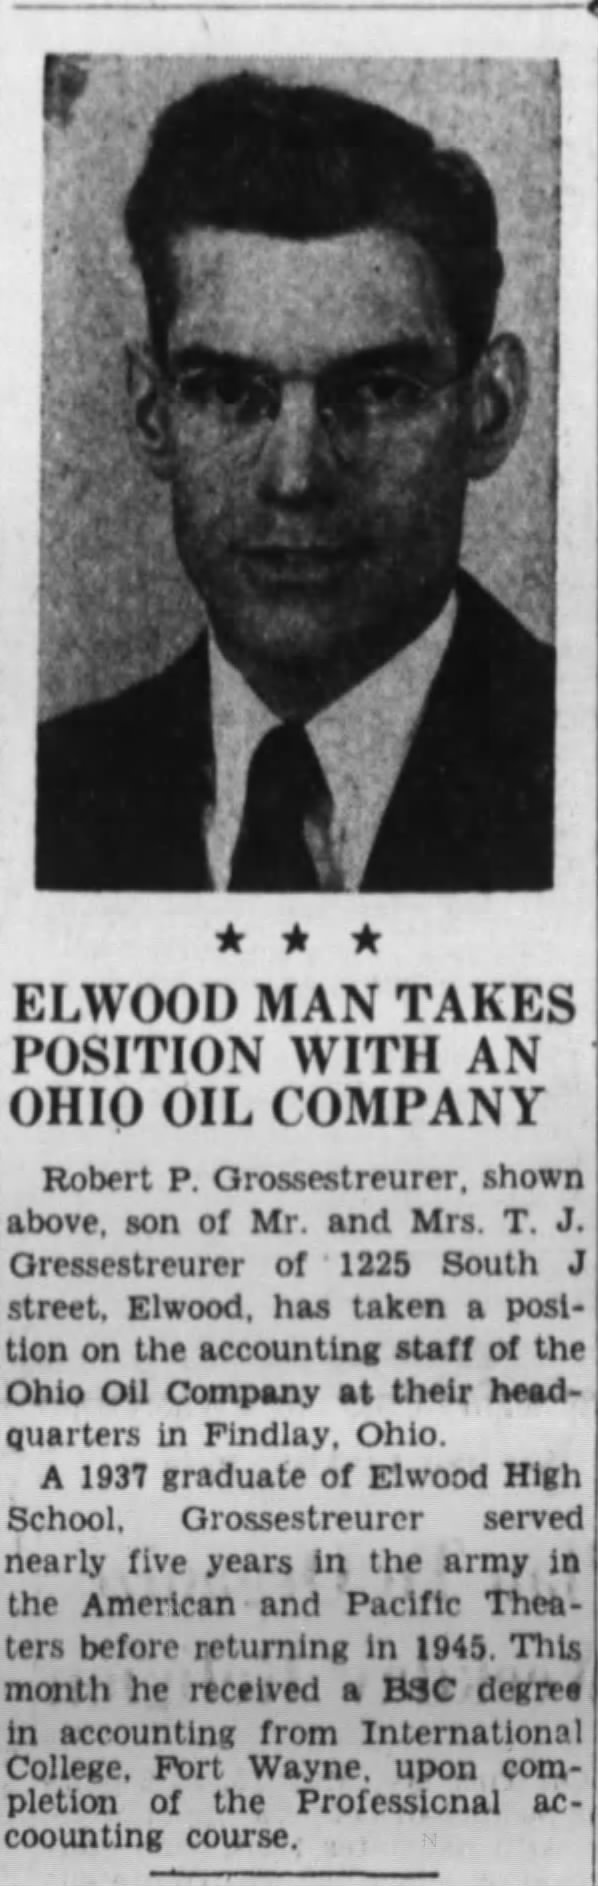 Robert P Grossestreuer takes a postion with the Ohio Oil Company, Findlay, Ohio